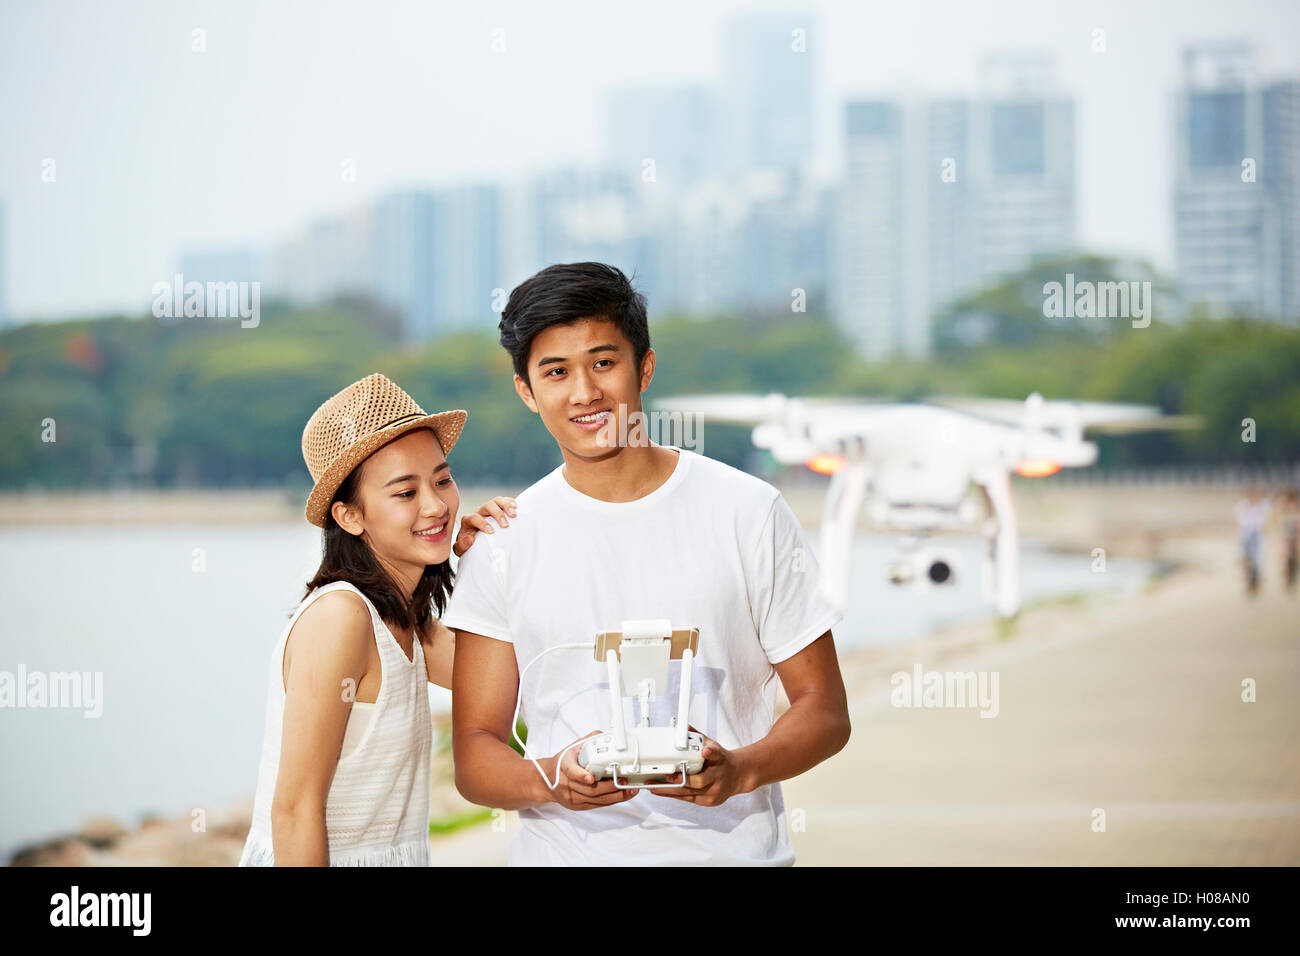 young asian couple operating a drone in a city park Stock Photo